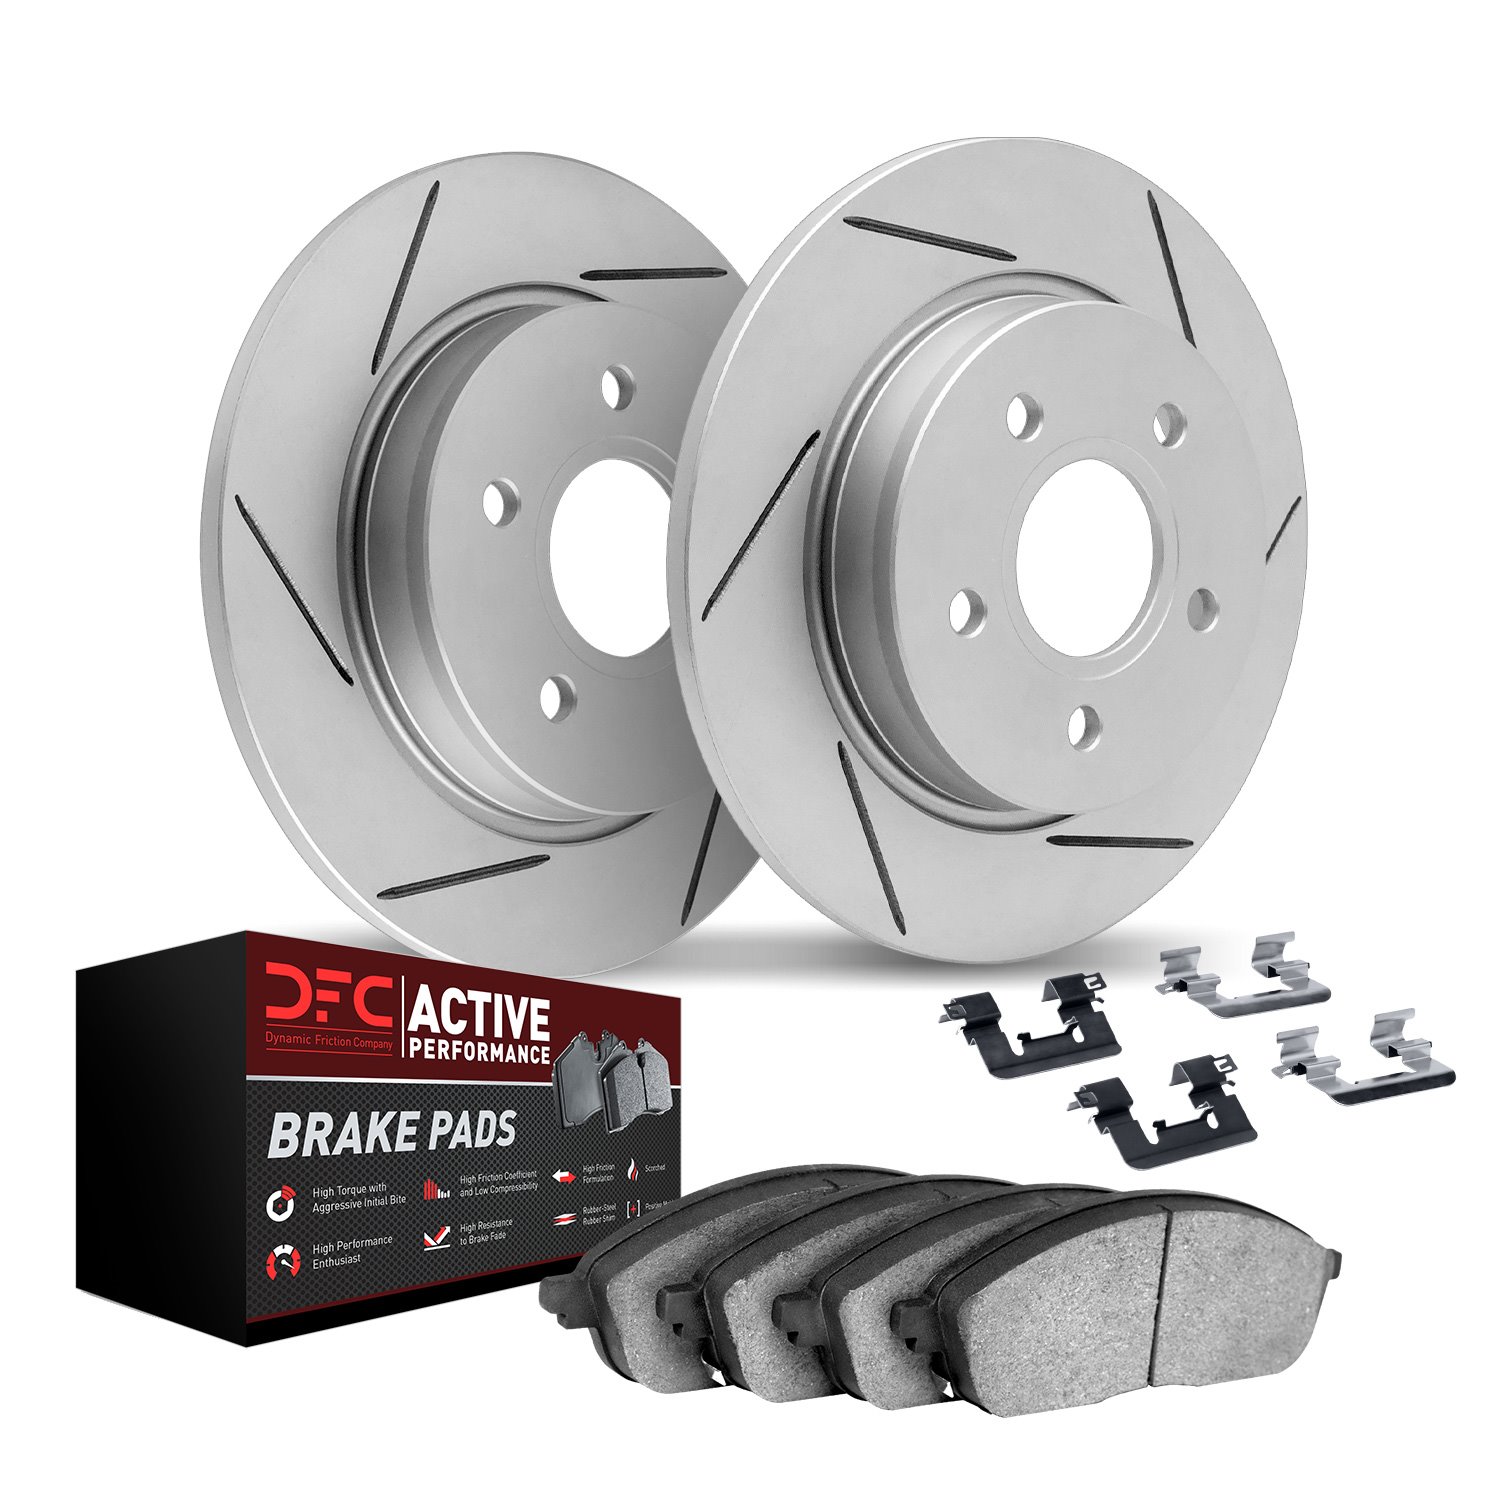 2712-32030 Geoperformance Slotted Brake Rotors with Active Performance Pads Kits & Hardware, Fits Select Mini, Position: Rear